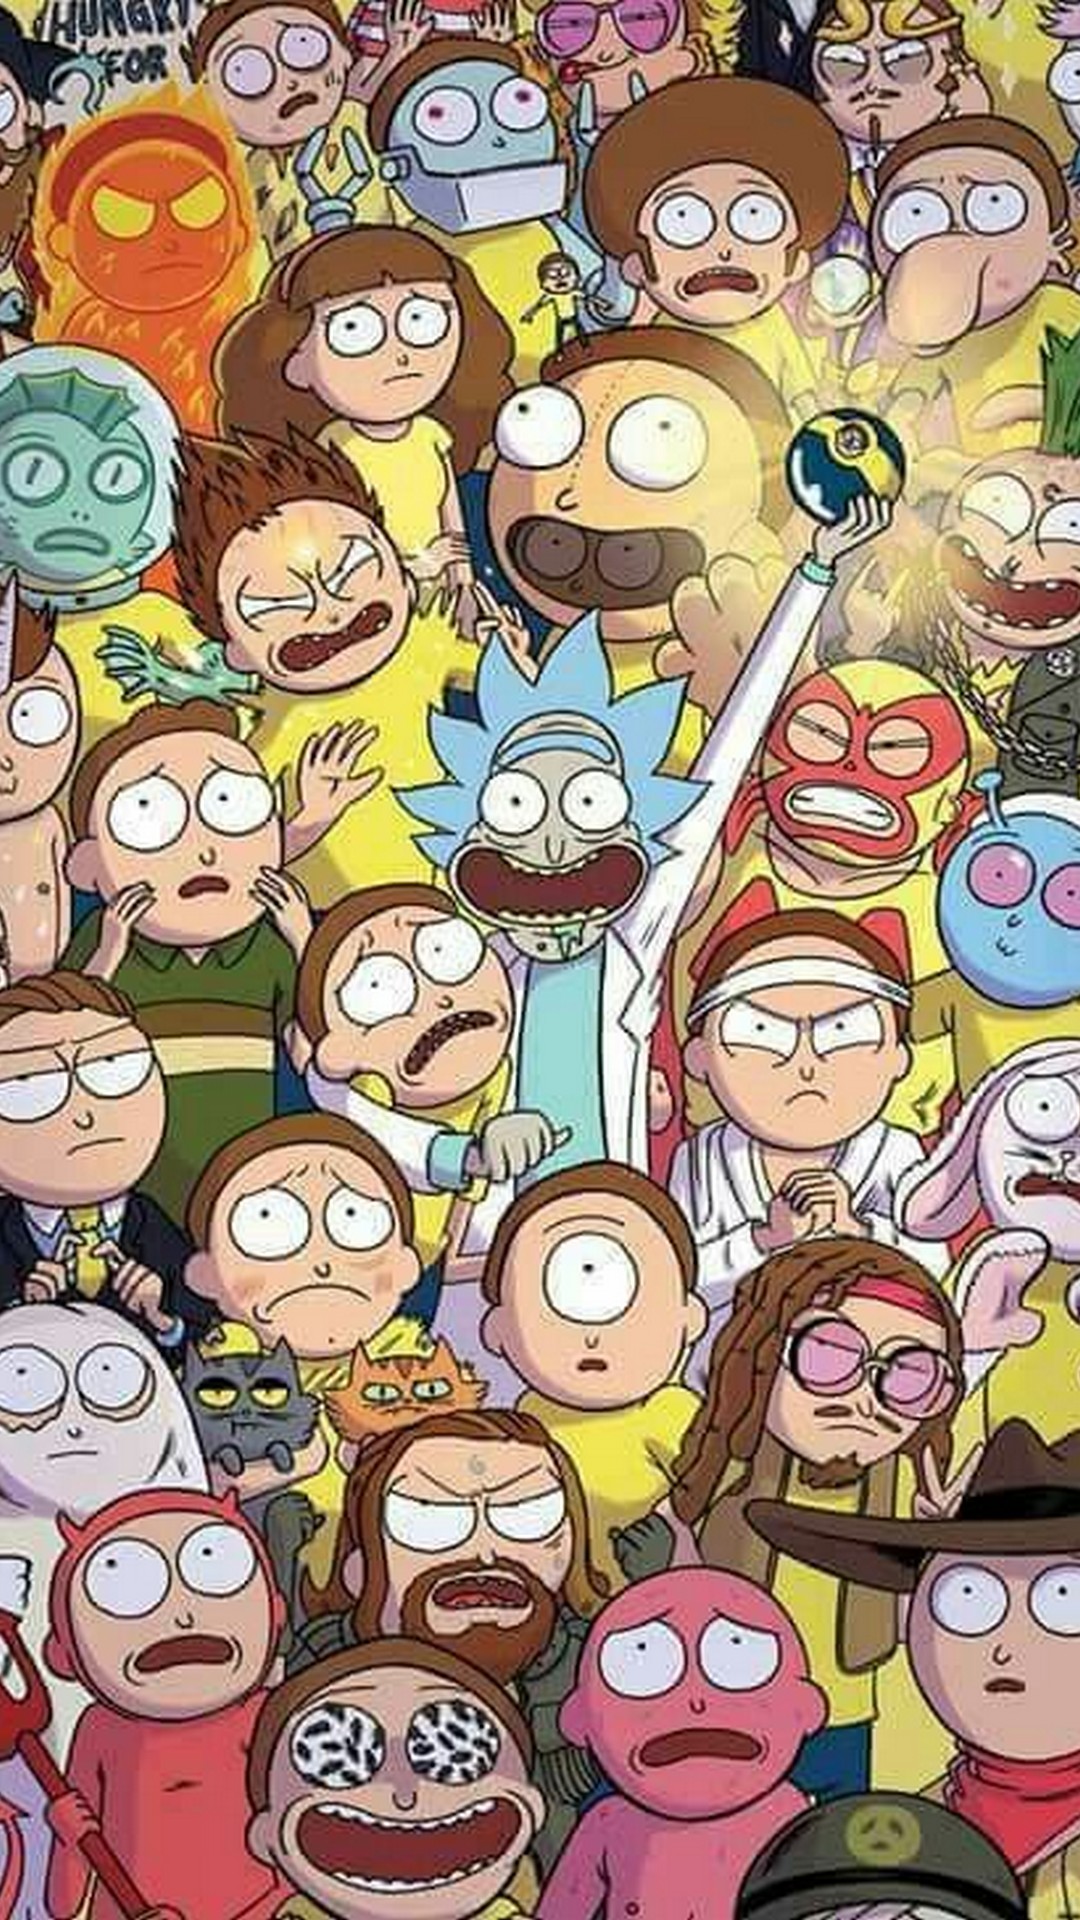 HD Wallpaper Rick And Morty Cartoon iPhone resolution 1080x1920